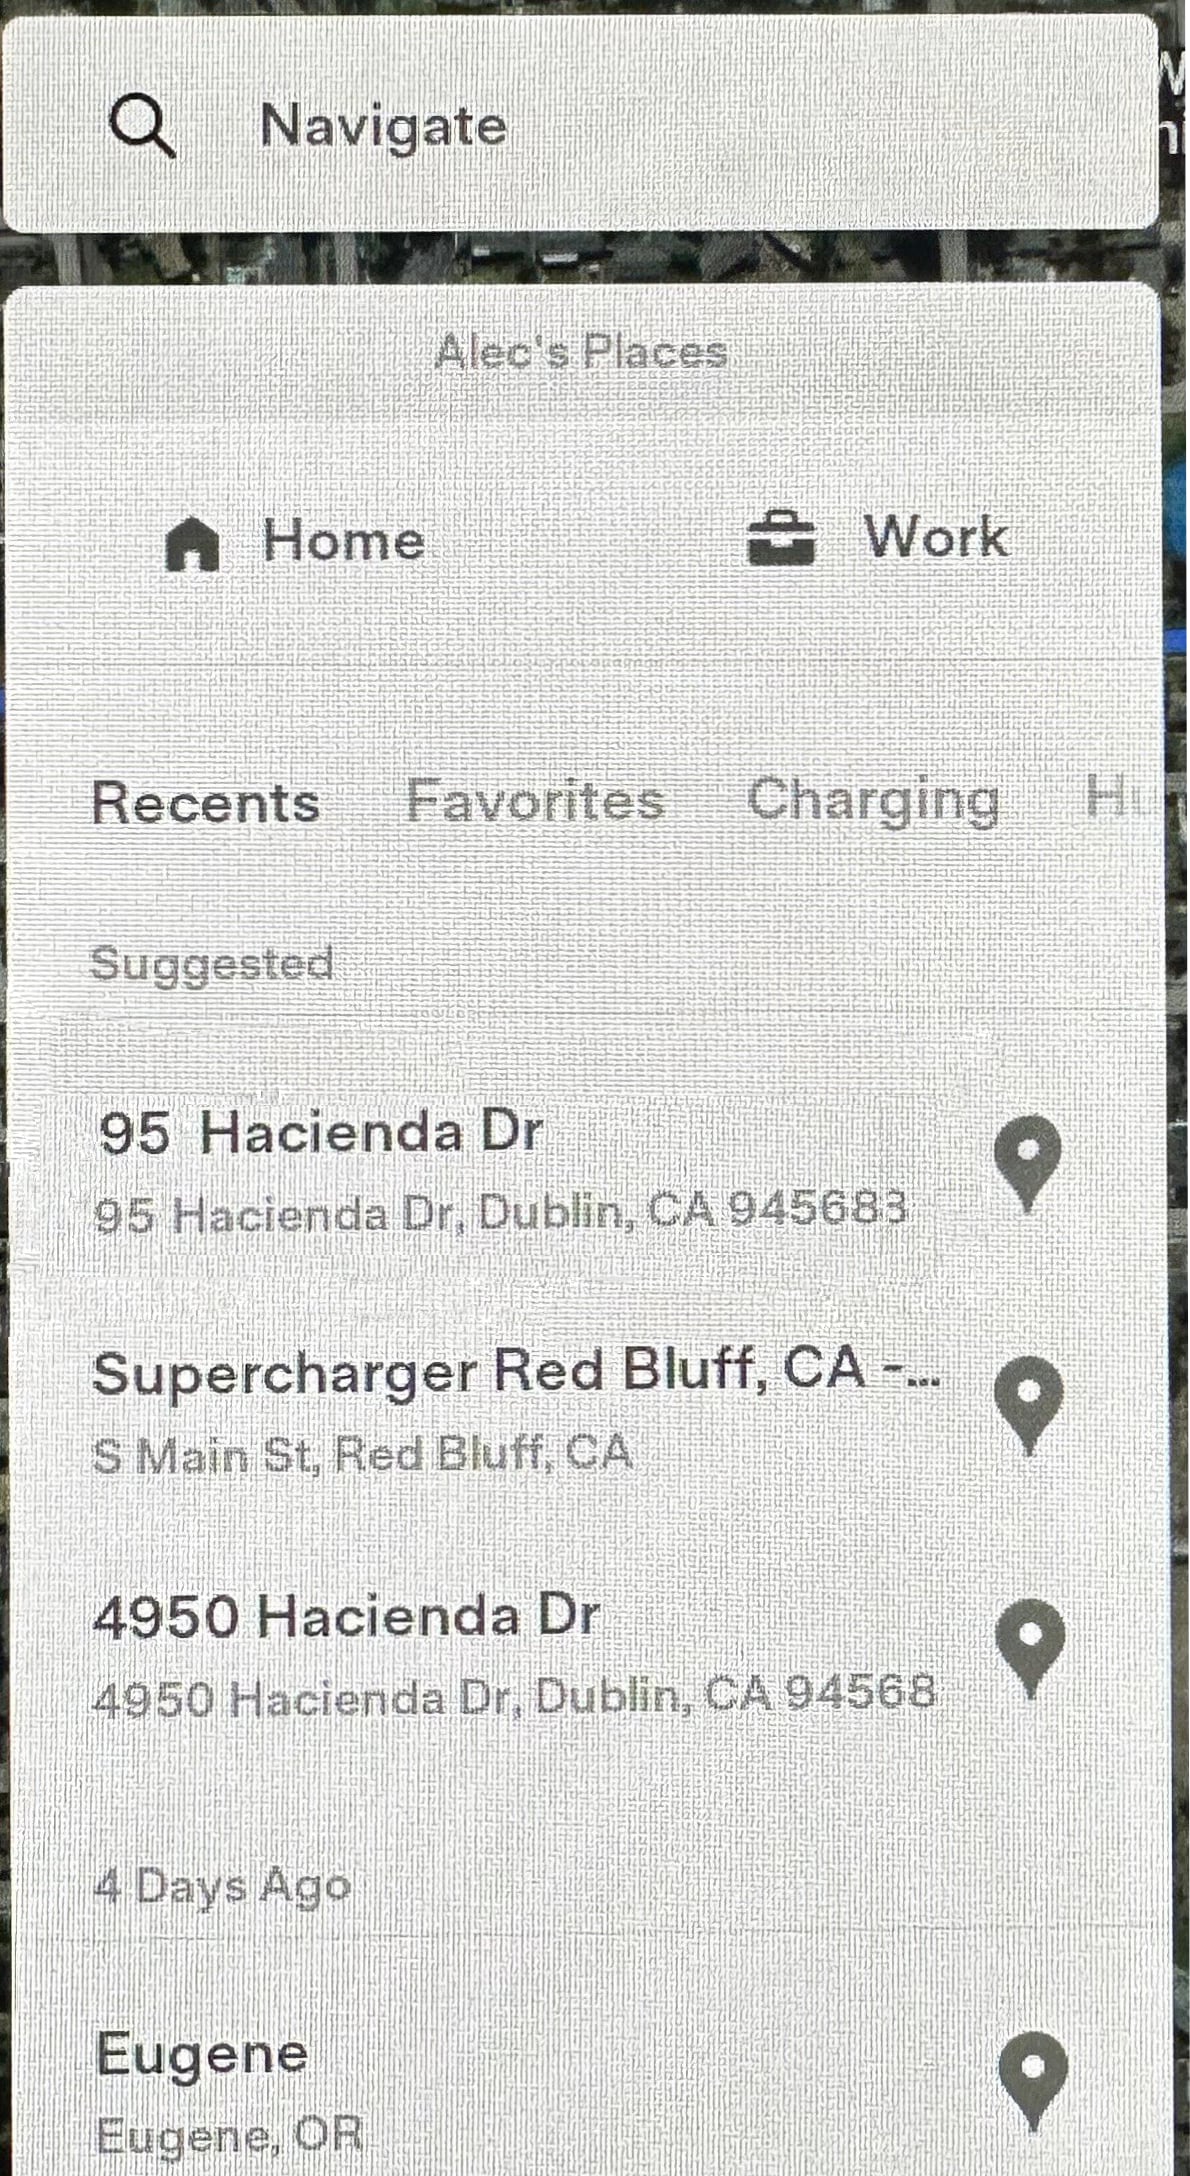 Tesla is adding suggested destinations